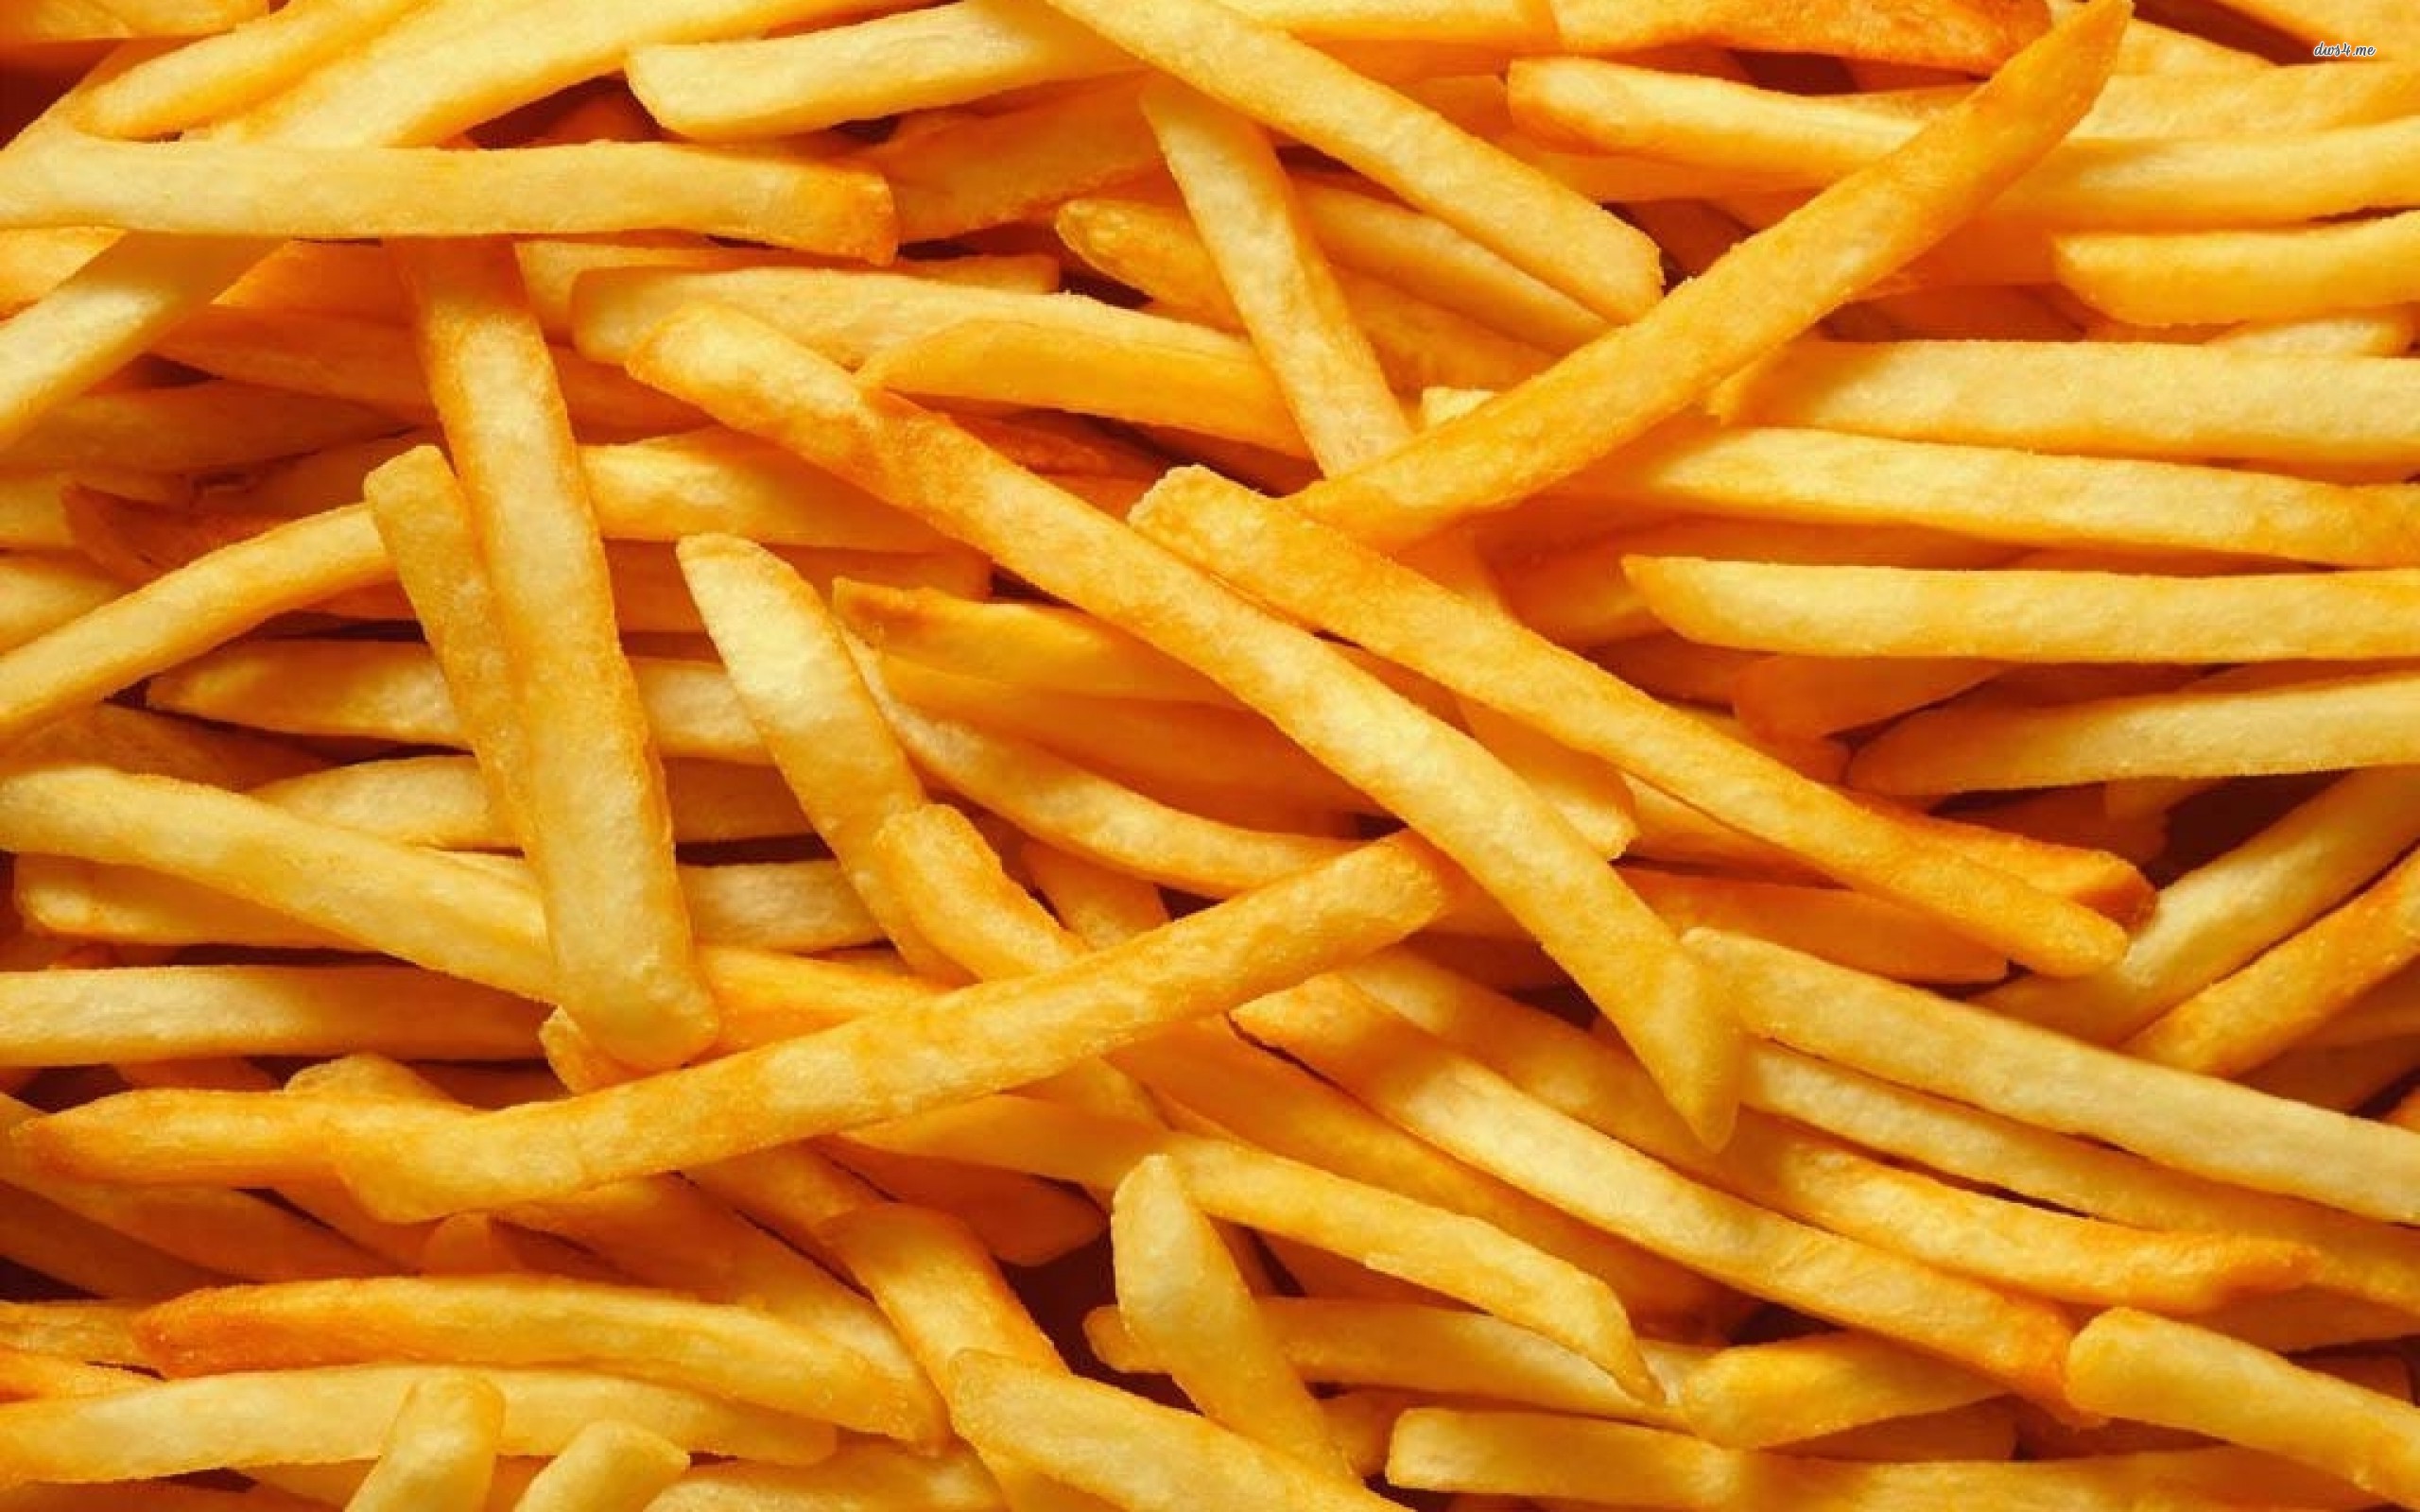 JULY 13 IS NATIONAL FRENCH FRY DAY!